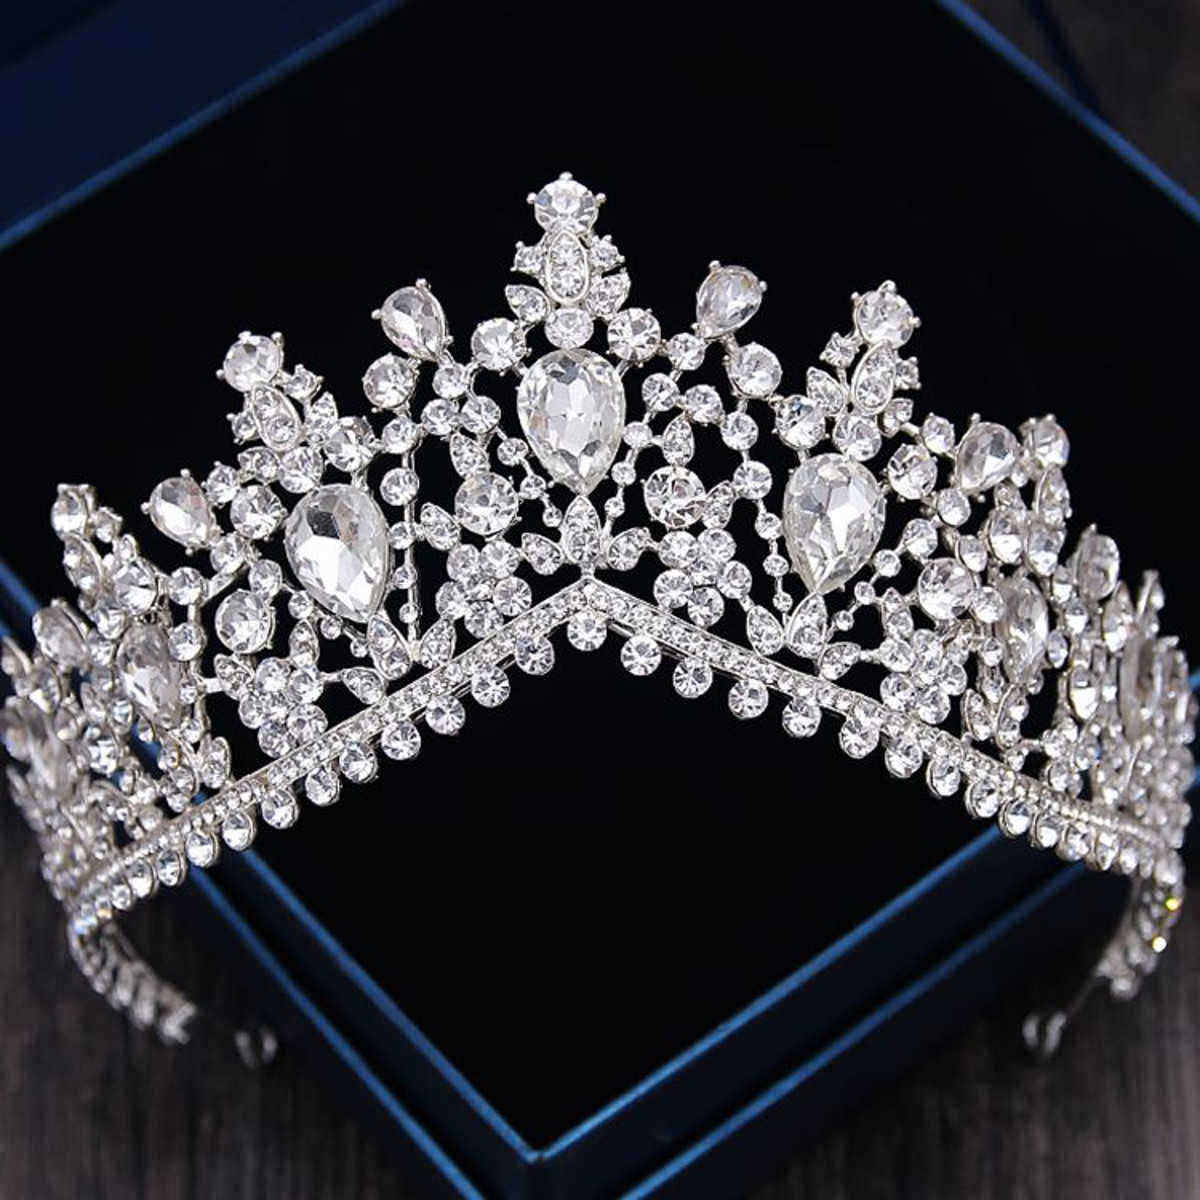 7cm-High-Large-Adult-Drip-Crystal-Wedding-Bridal-Party-Pageant-Prom-Tiara-Crown-Hair-Accessories-1364647